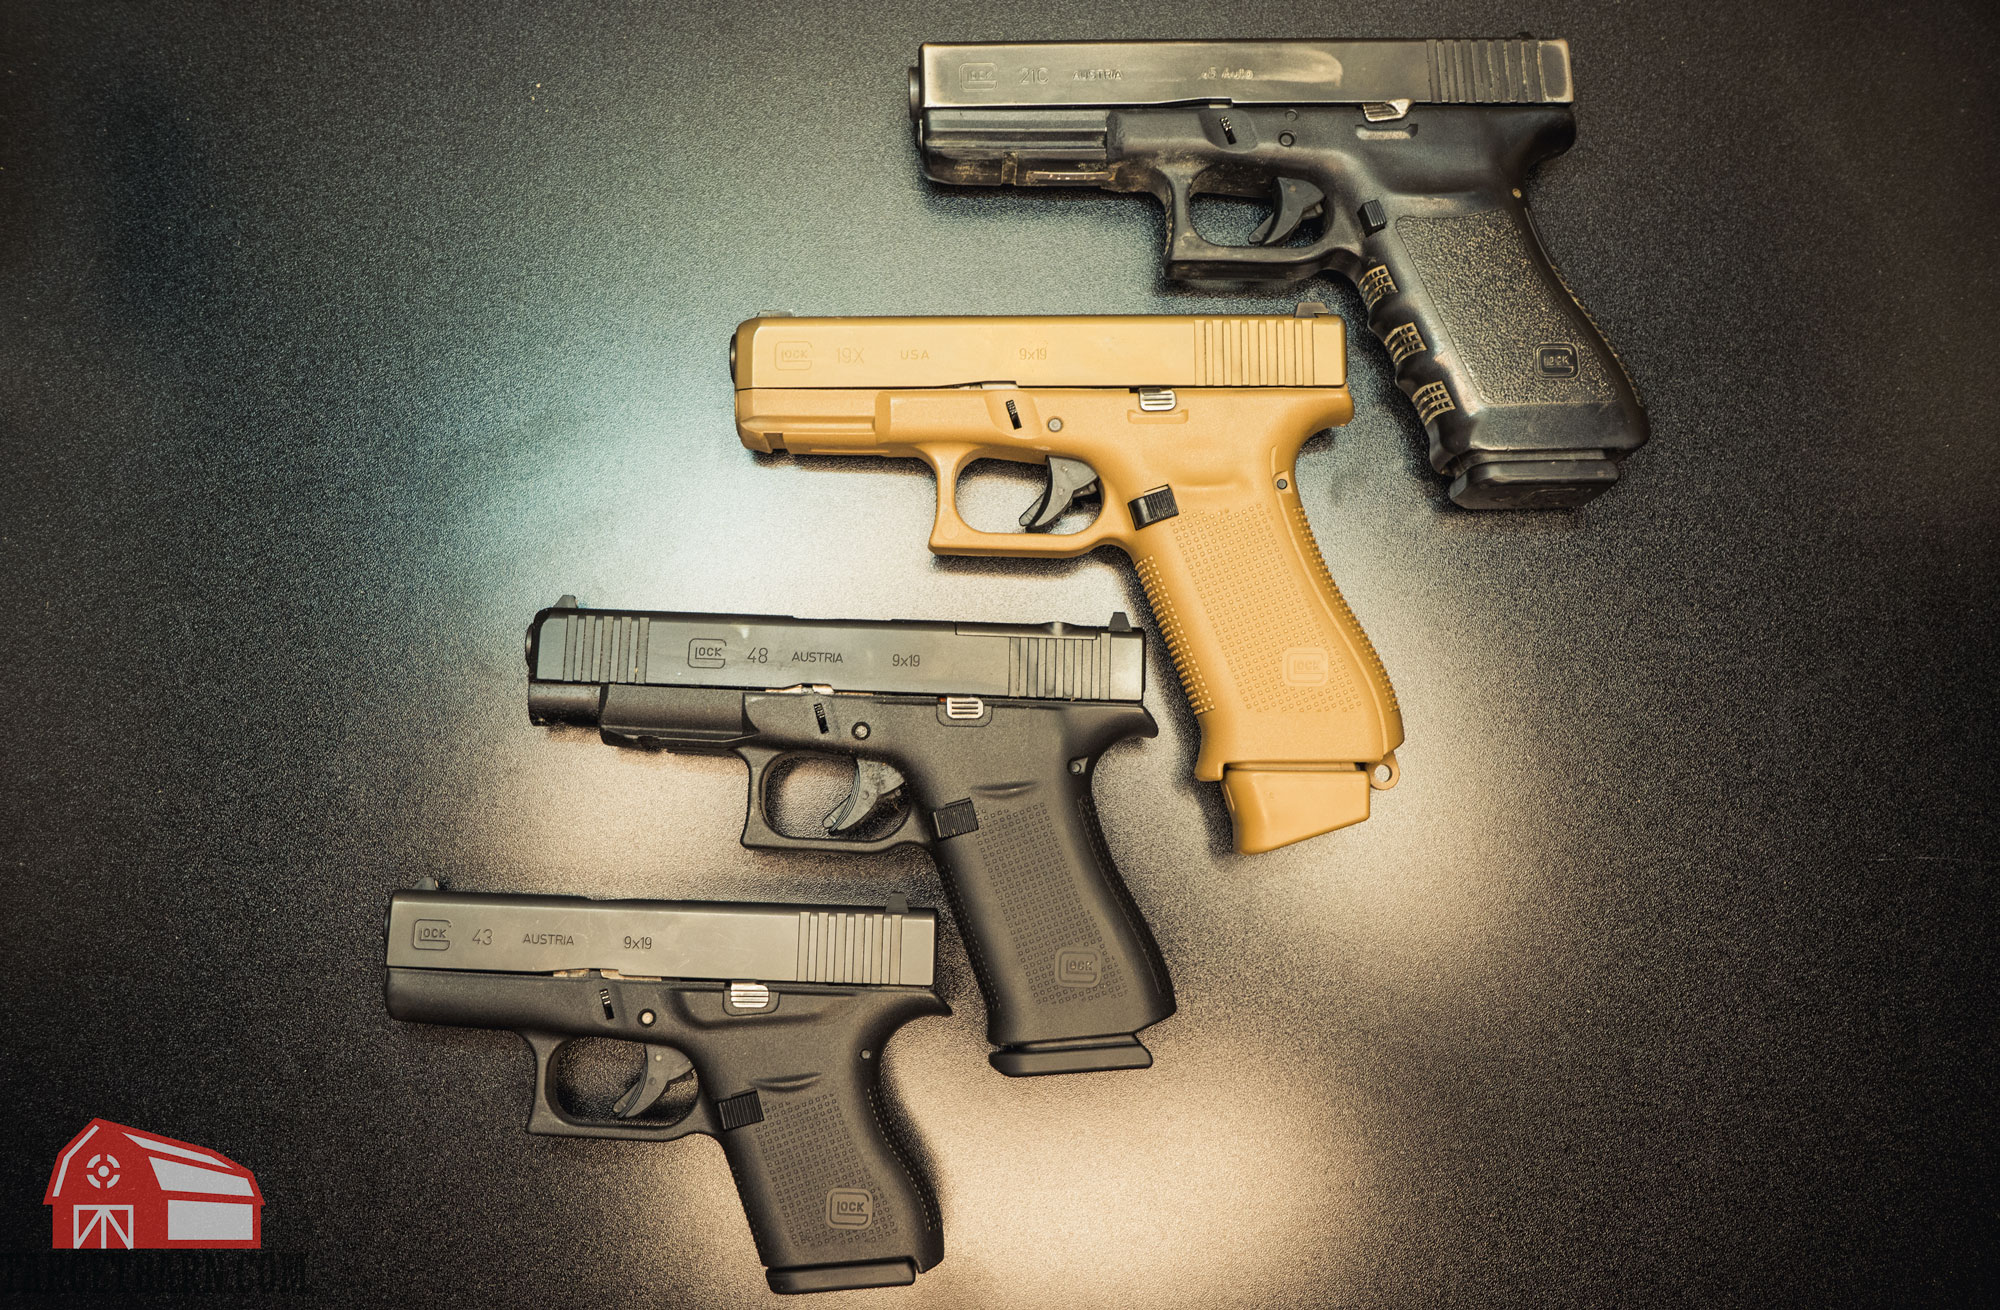 showing four different glock barrel length pistols, the g43, g48, g19x, and g20